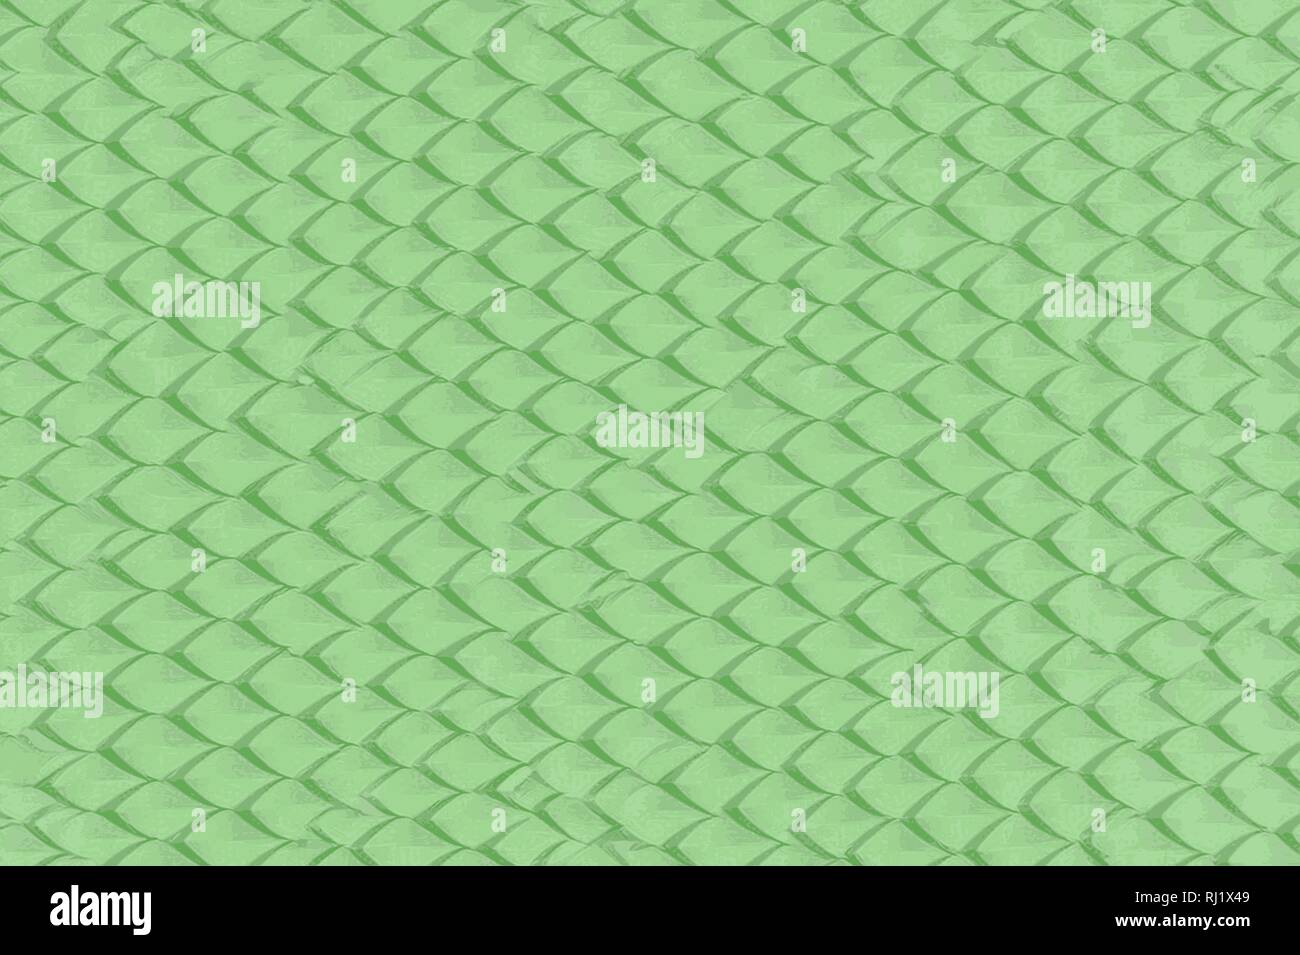 Green abstract dragon or snake scales on the skin Stock Photo